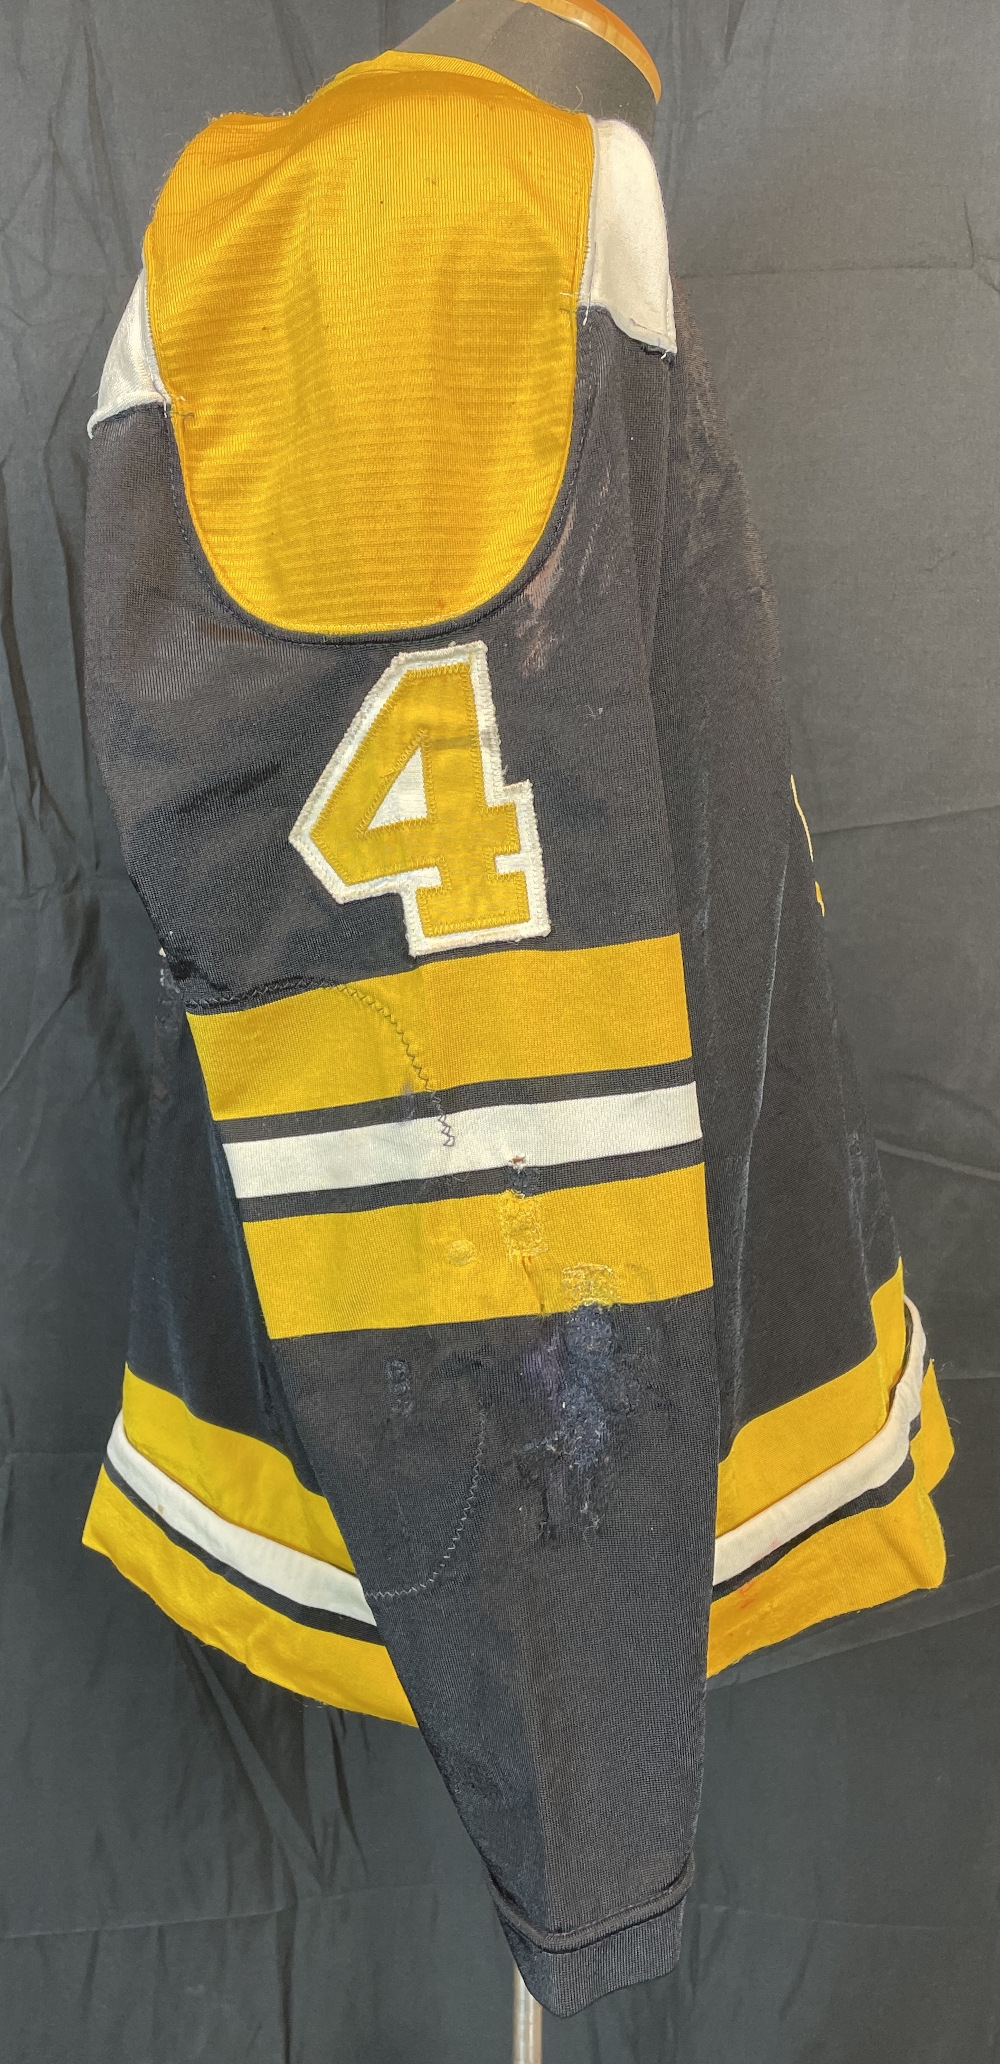 Bobby Orr's final game-worn Bruins jersey is up for auction, and